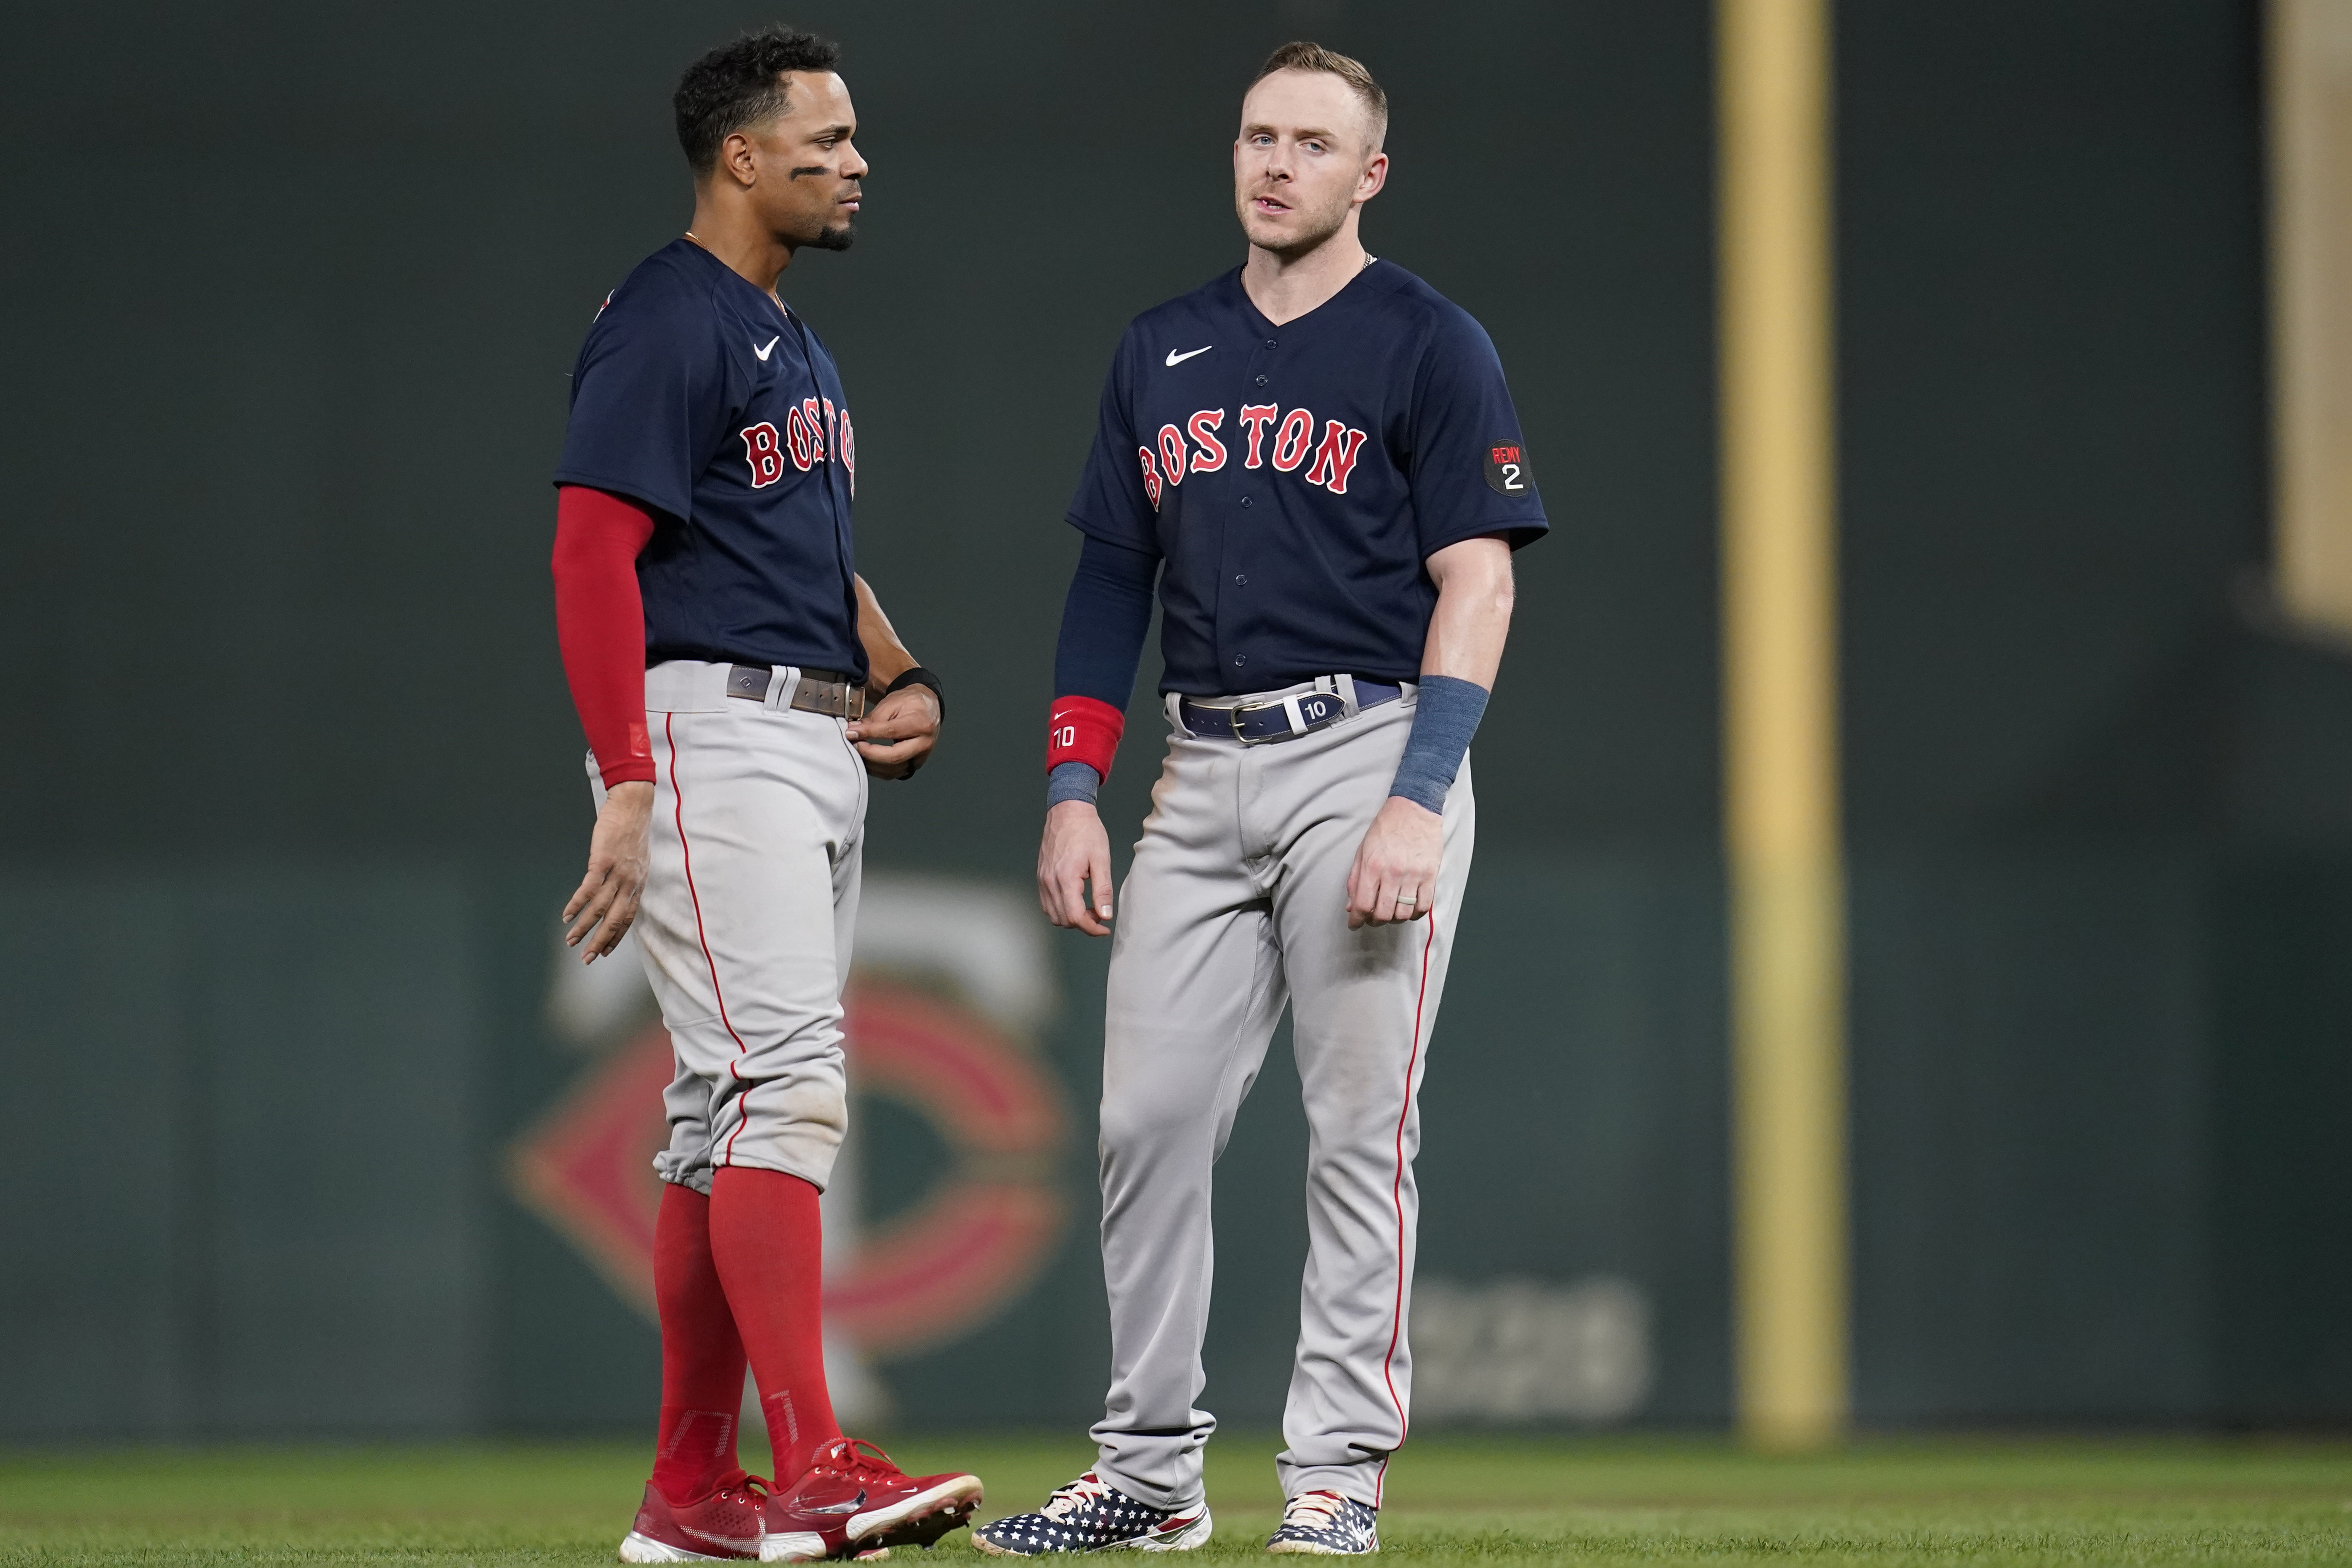 What the 2019 Twins could learn from 2004 Red Sox